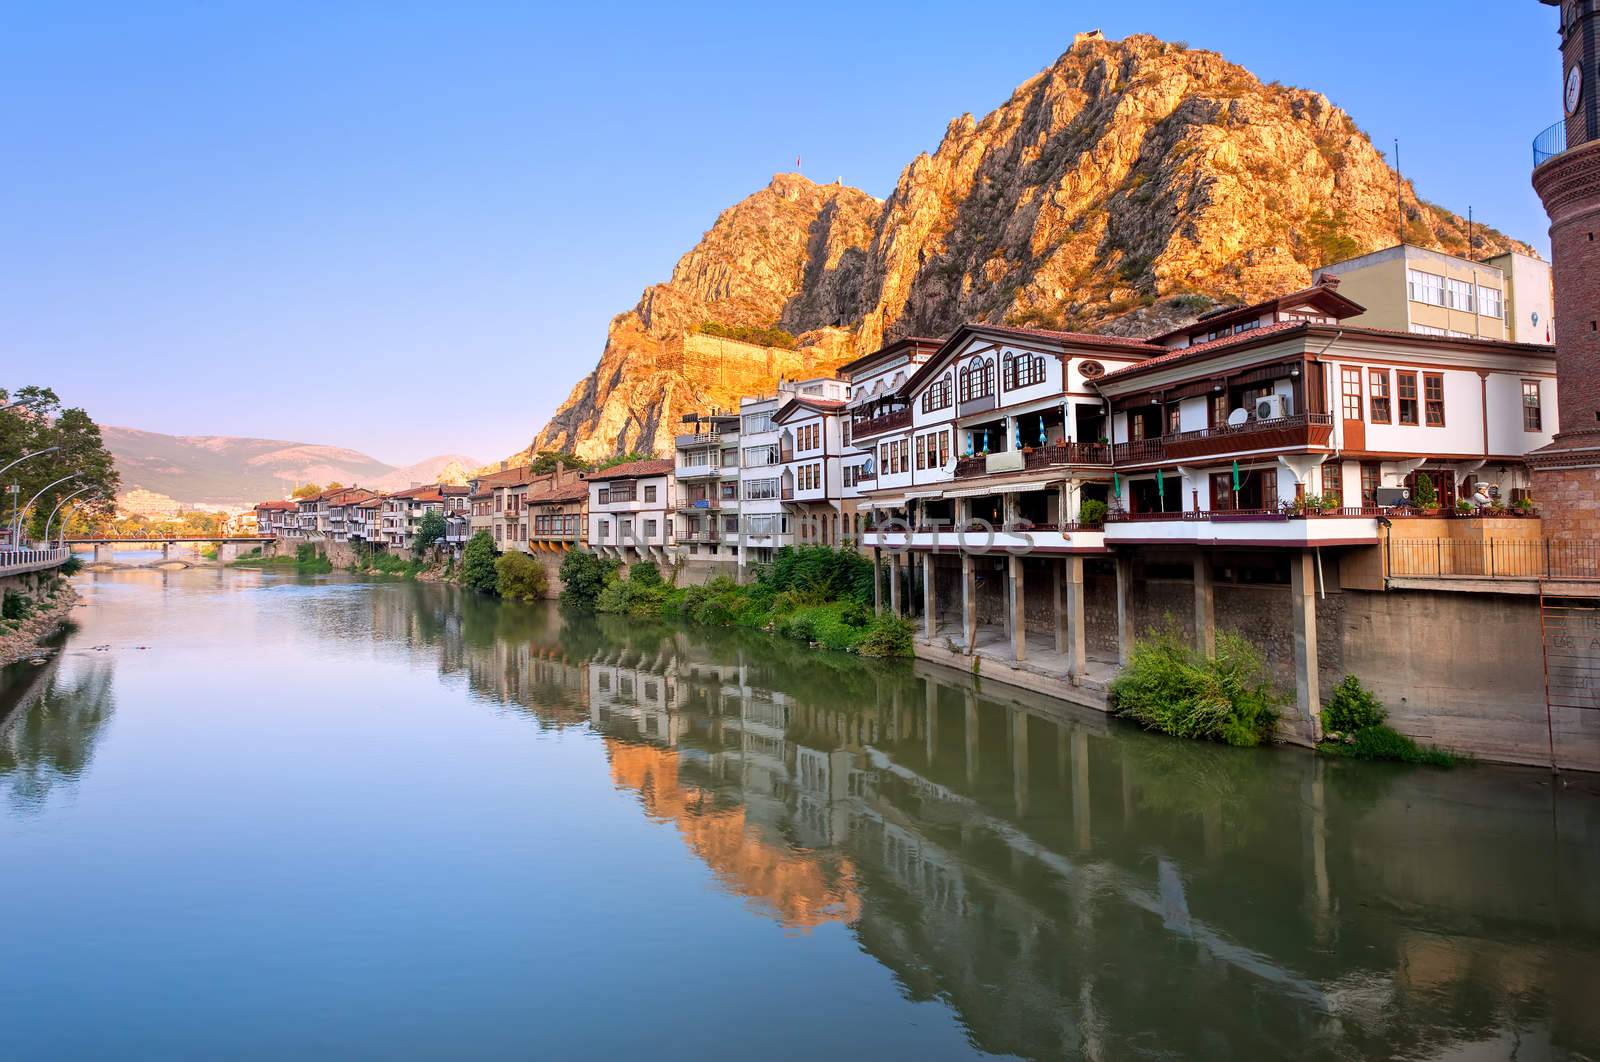 Traditional ottoman half timbered houses in Amasya, Turkey